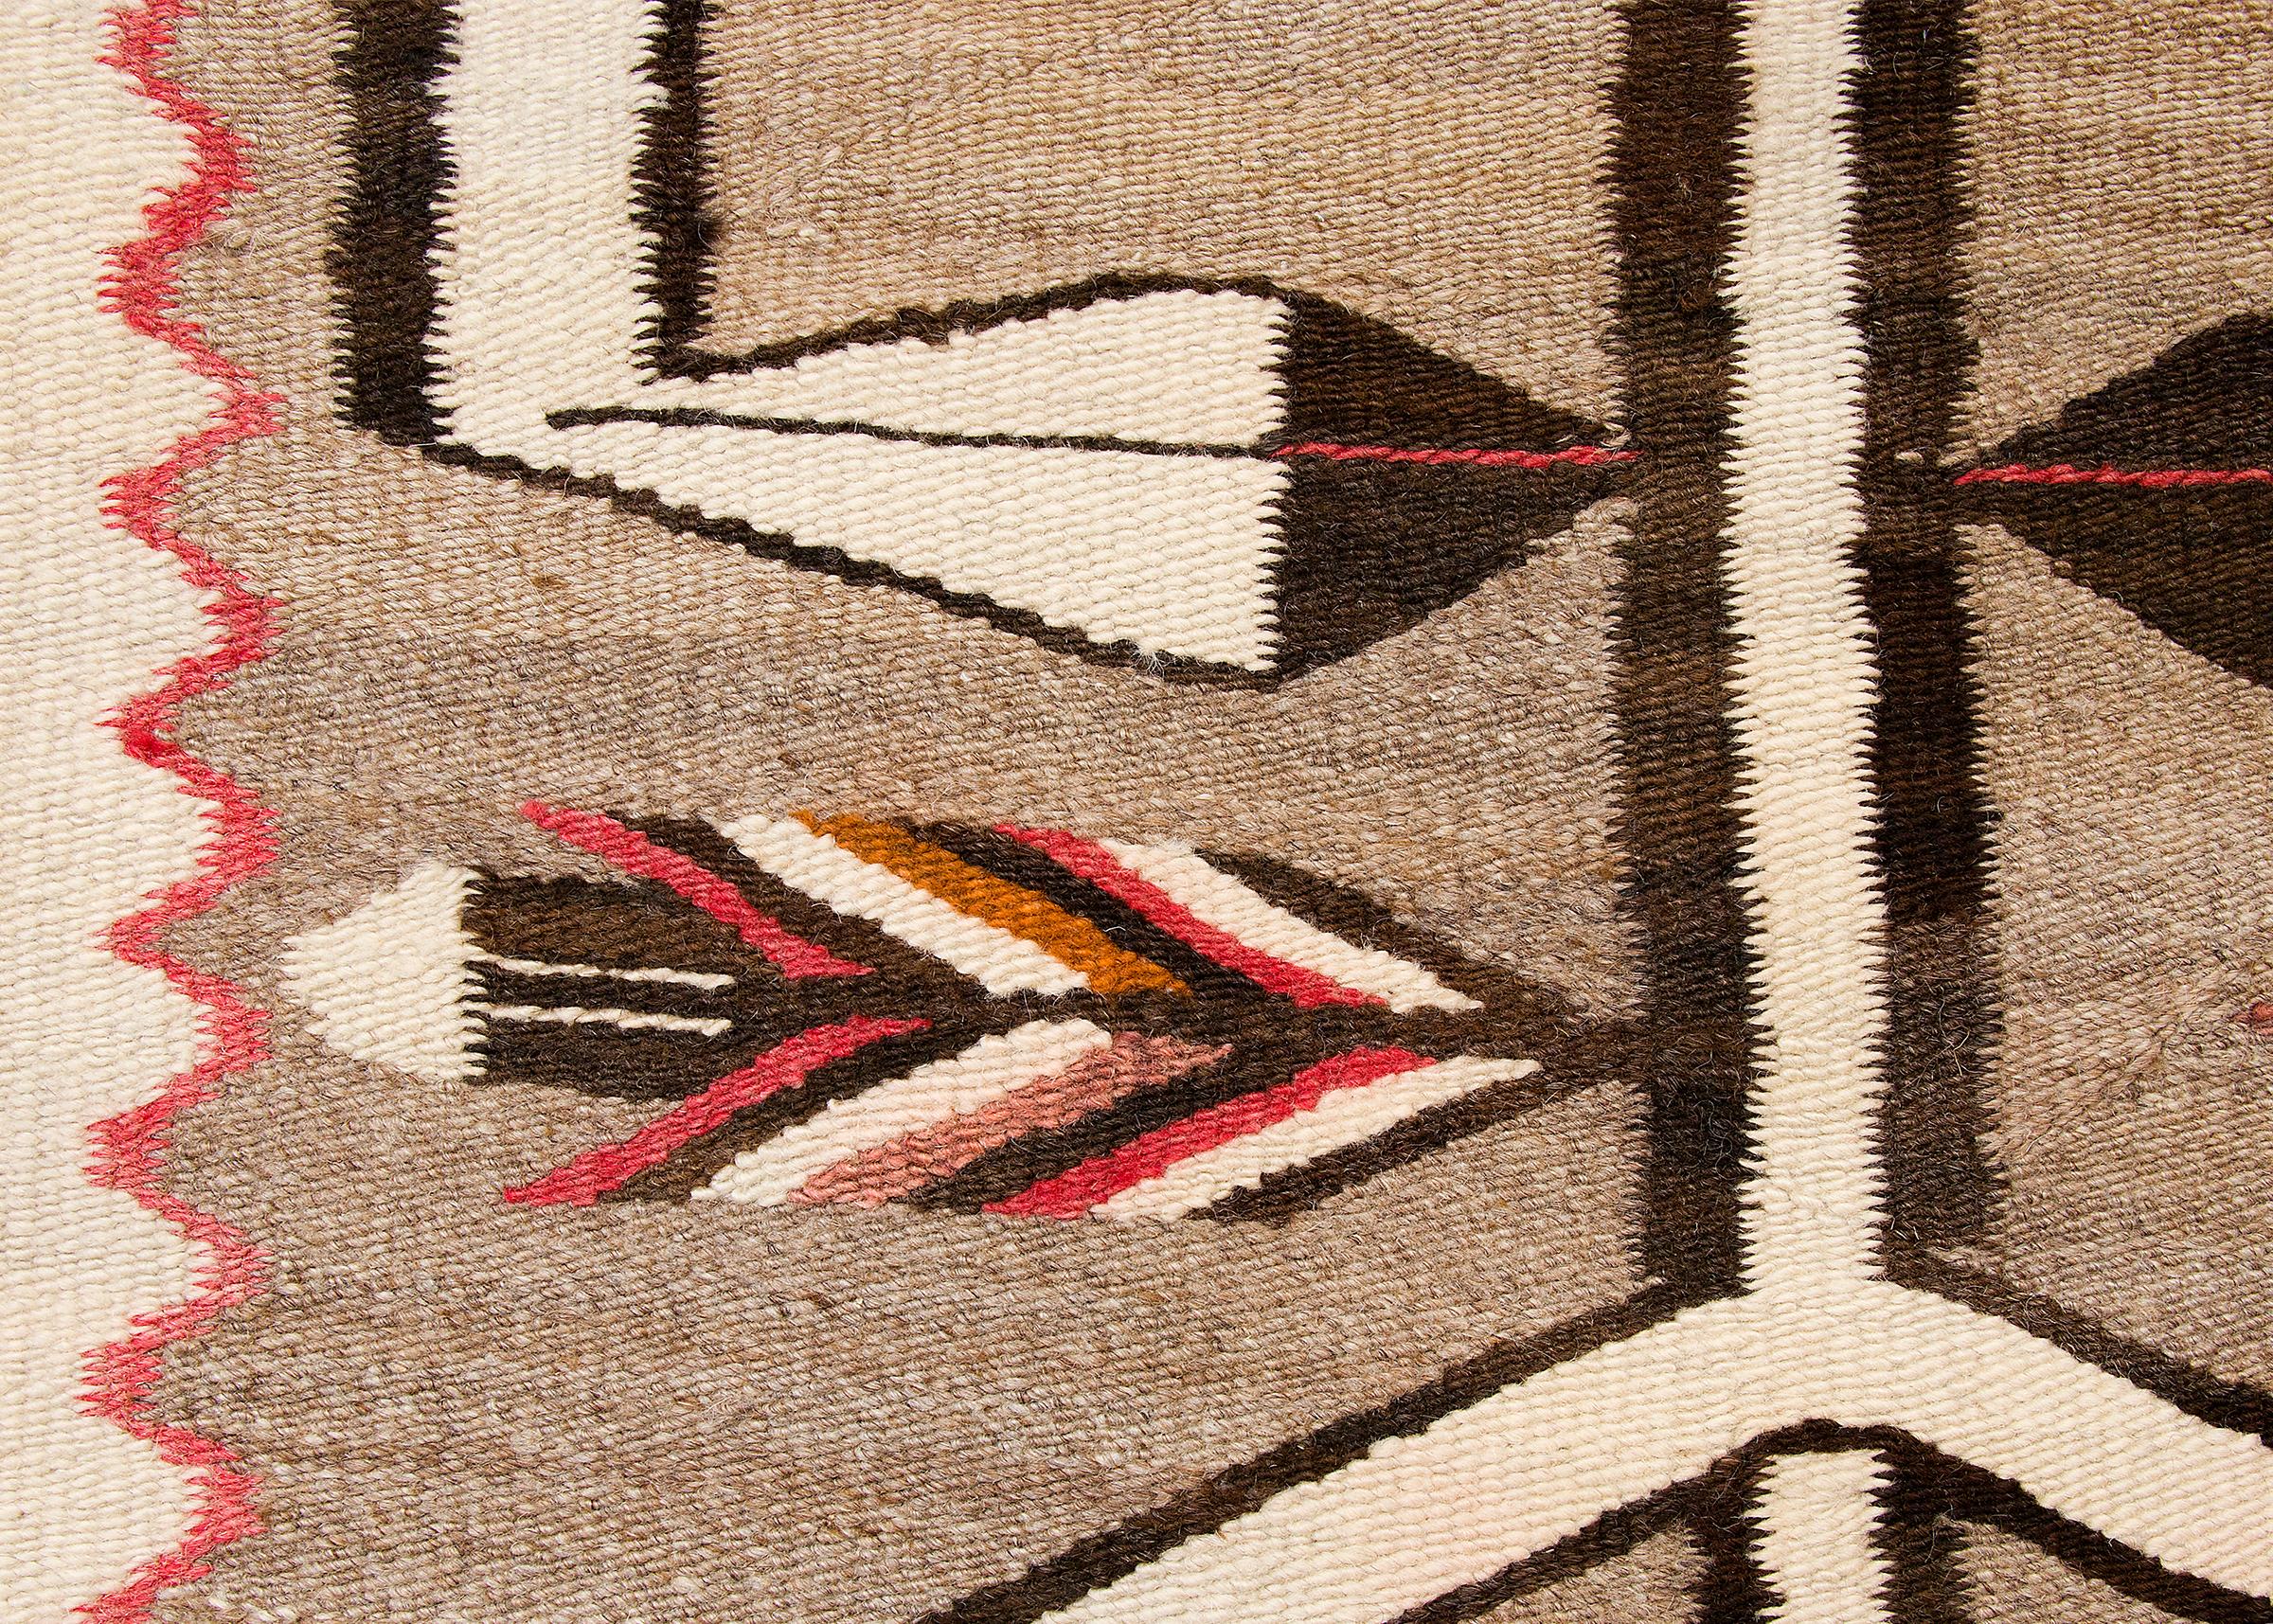 Hand-Woven Vintage Navajo Rug Crystal Trading Post circa 1930 Pictorial Feathers and Arrows